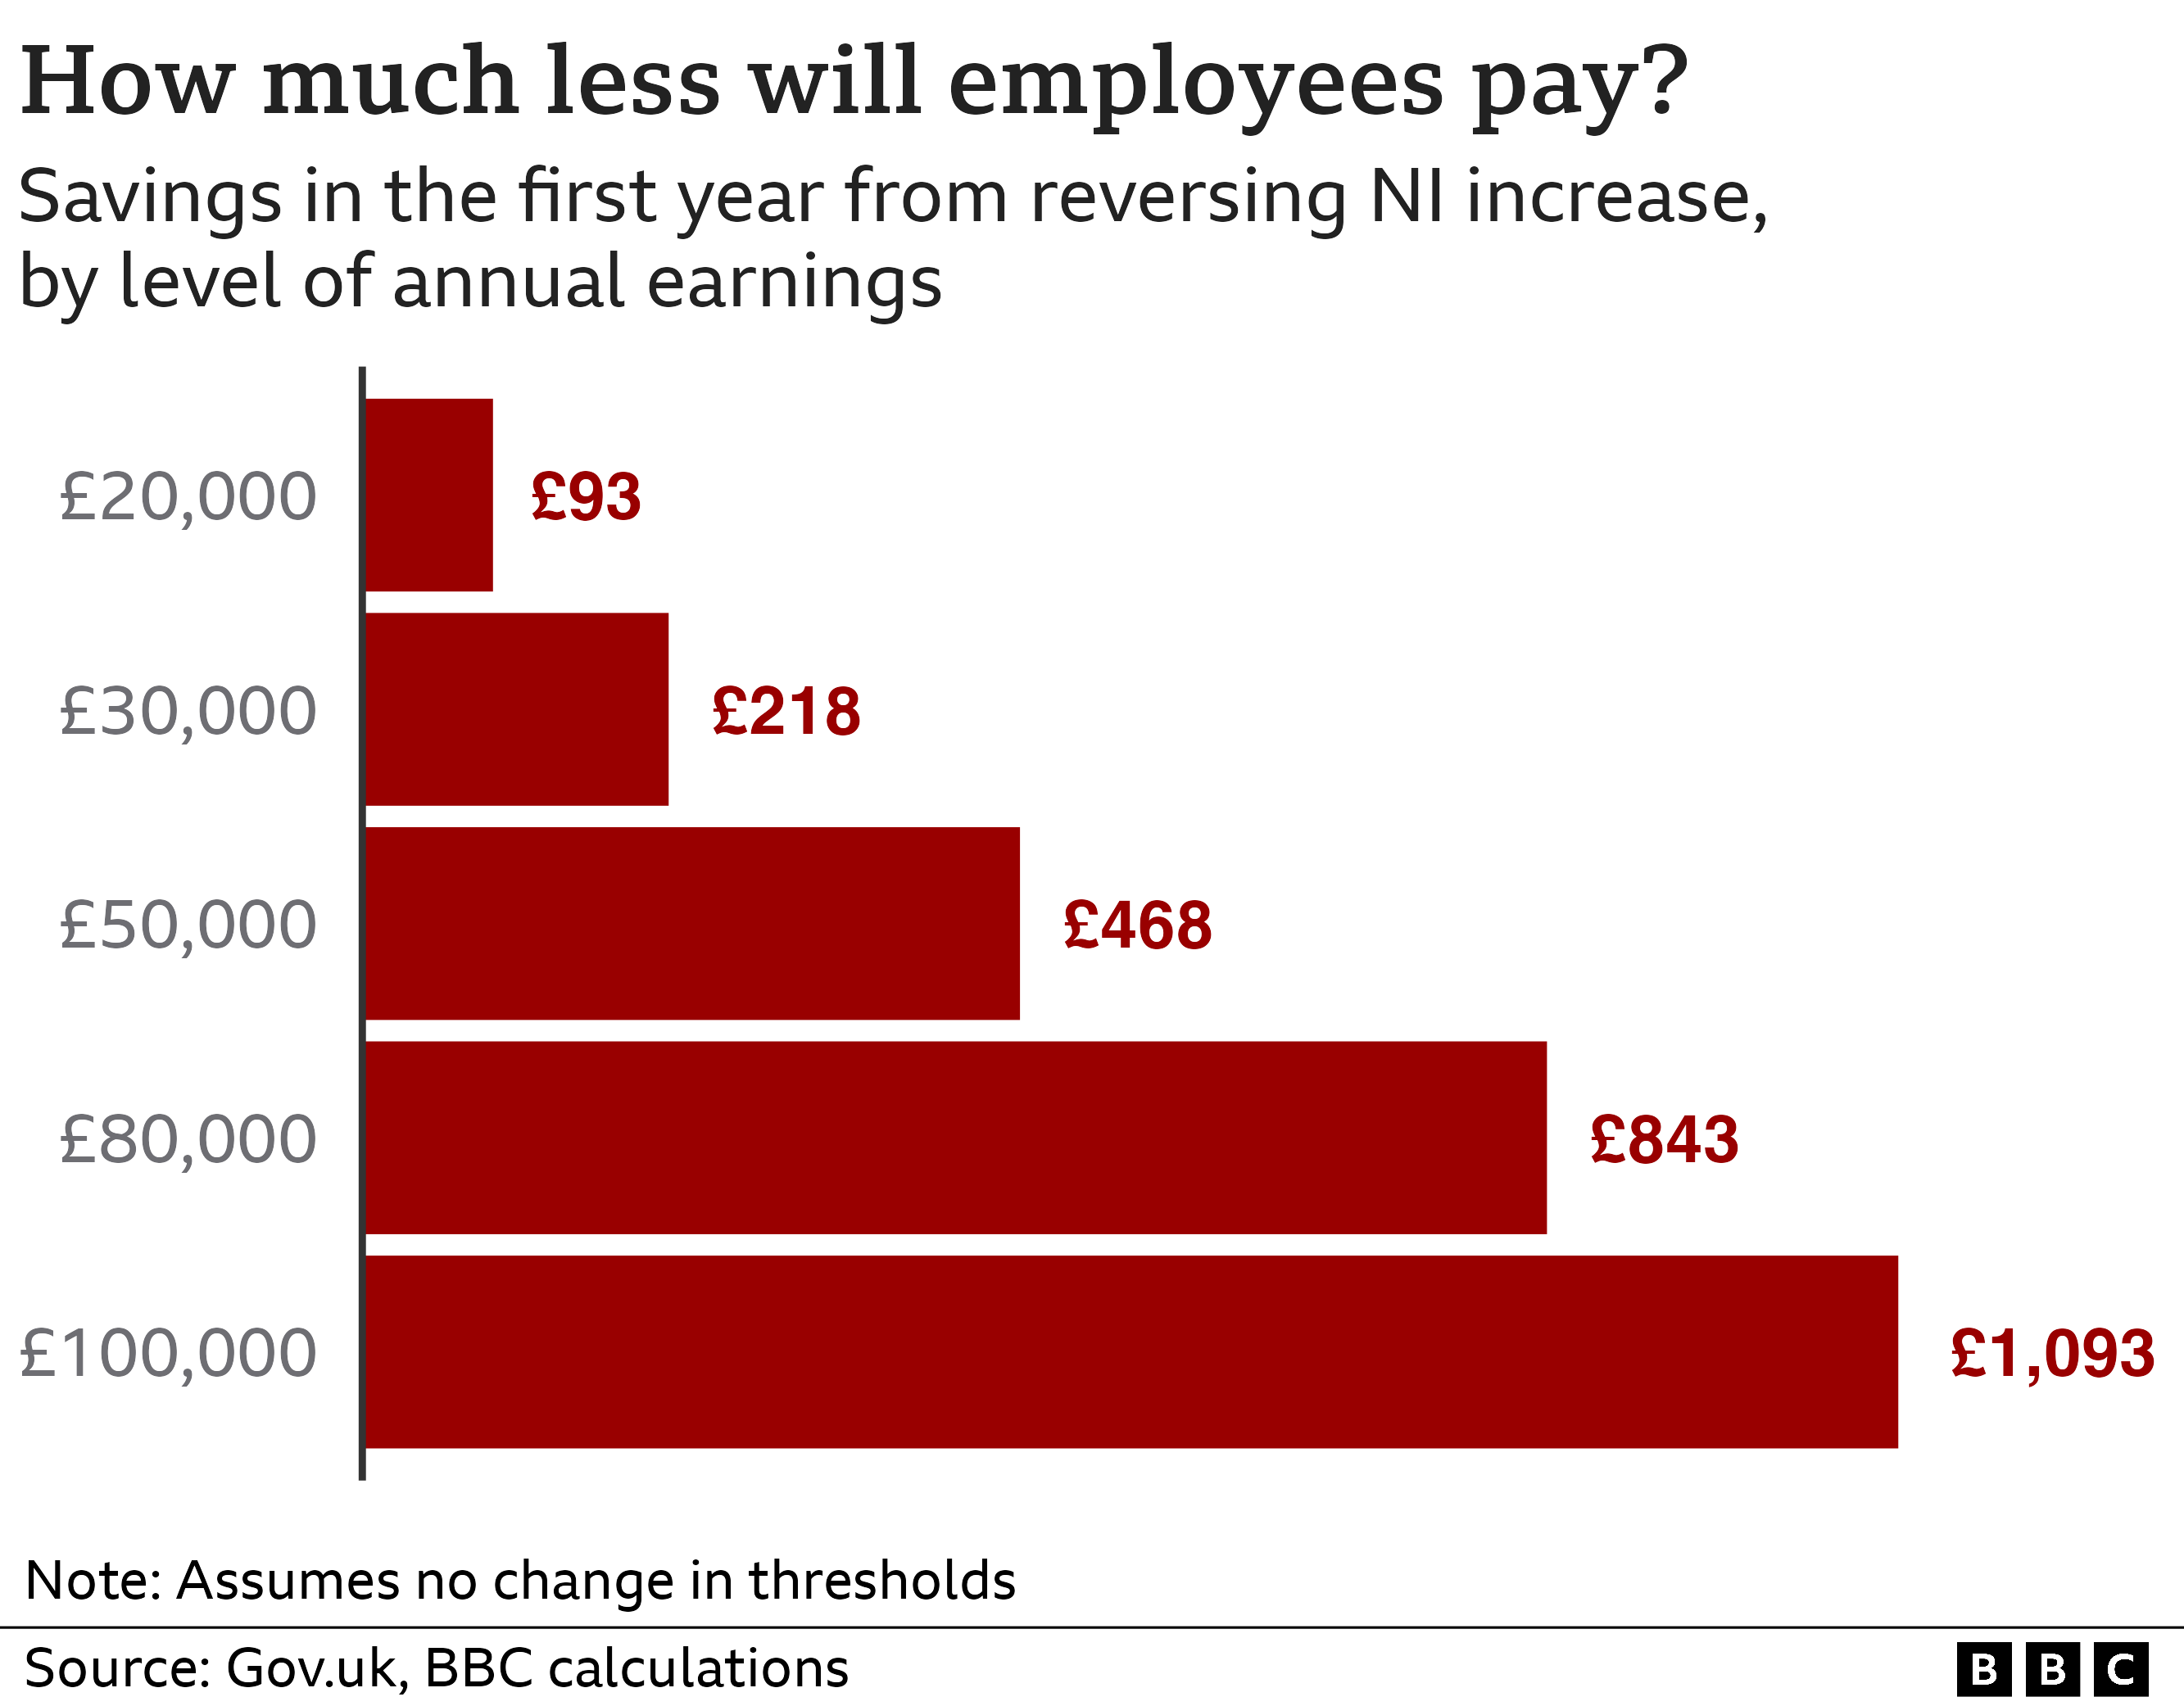 Chart showing the amount saved by employees in the first year by not introducing the health and social care levy